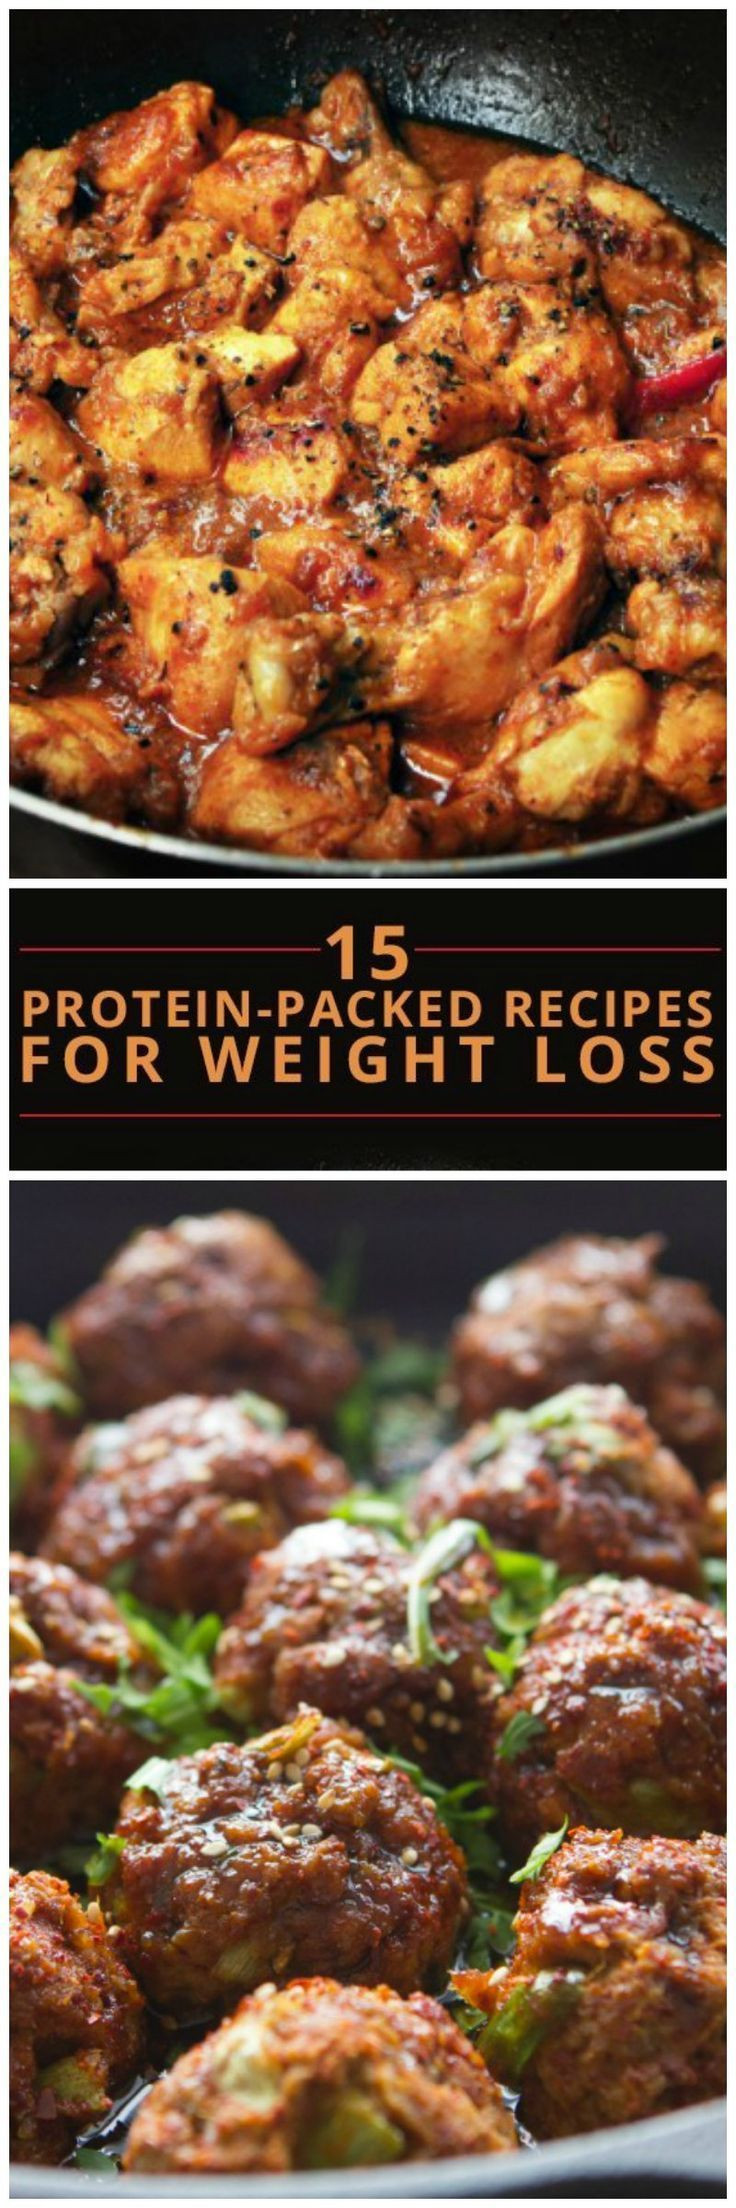 Bariatric Chicken Recipes Weight Loss Surgery
 17 Best images about bariatric recipes on Pinterest